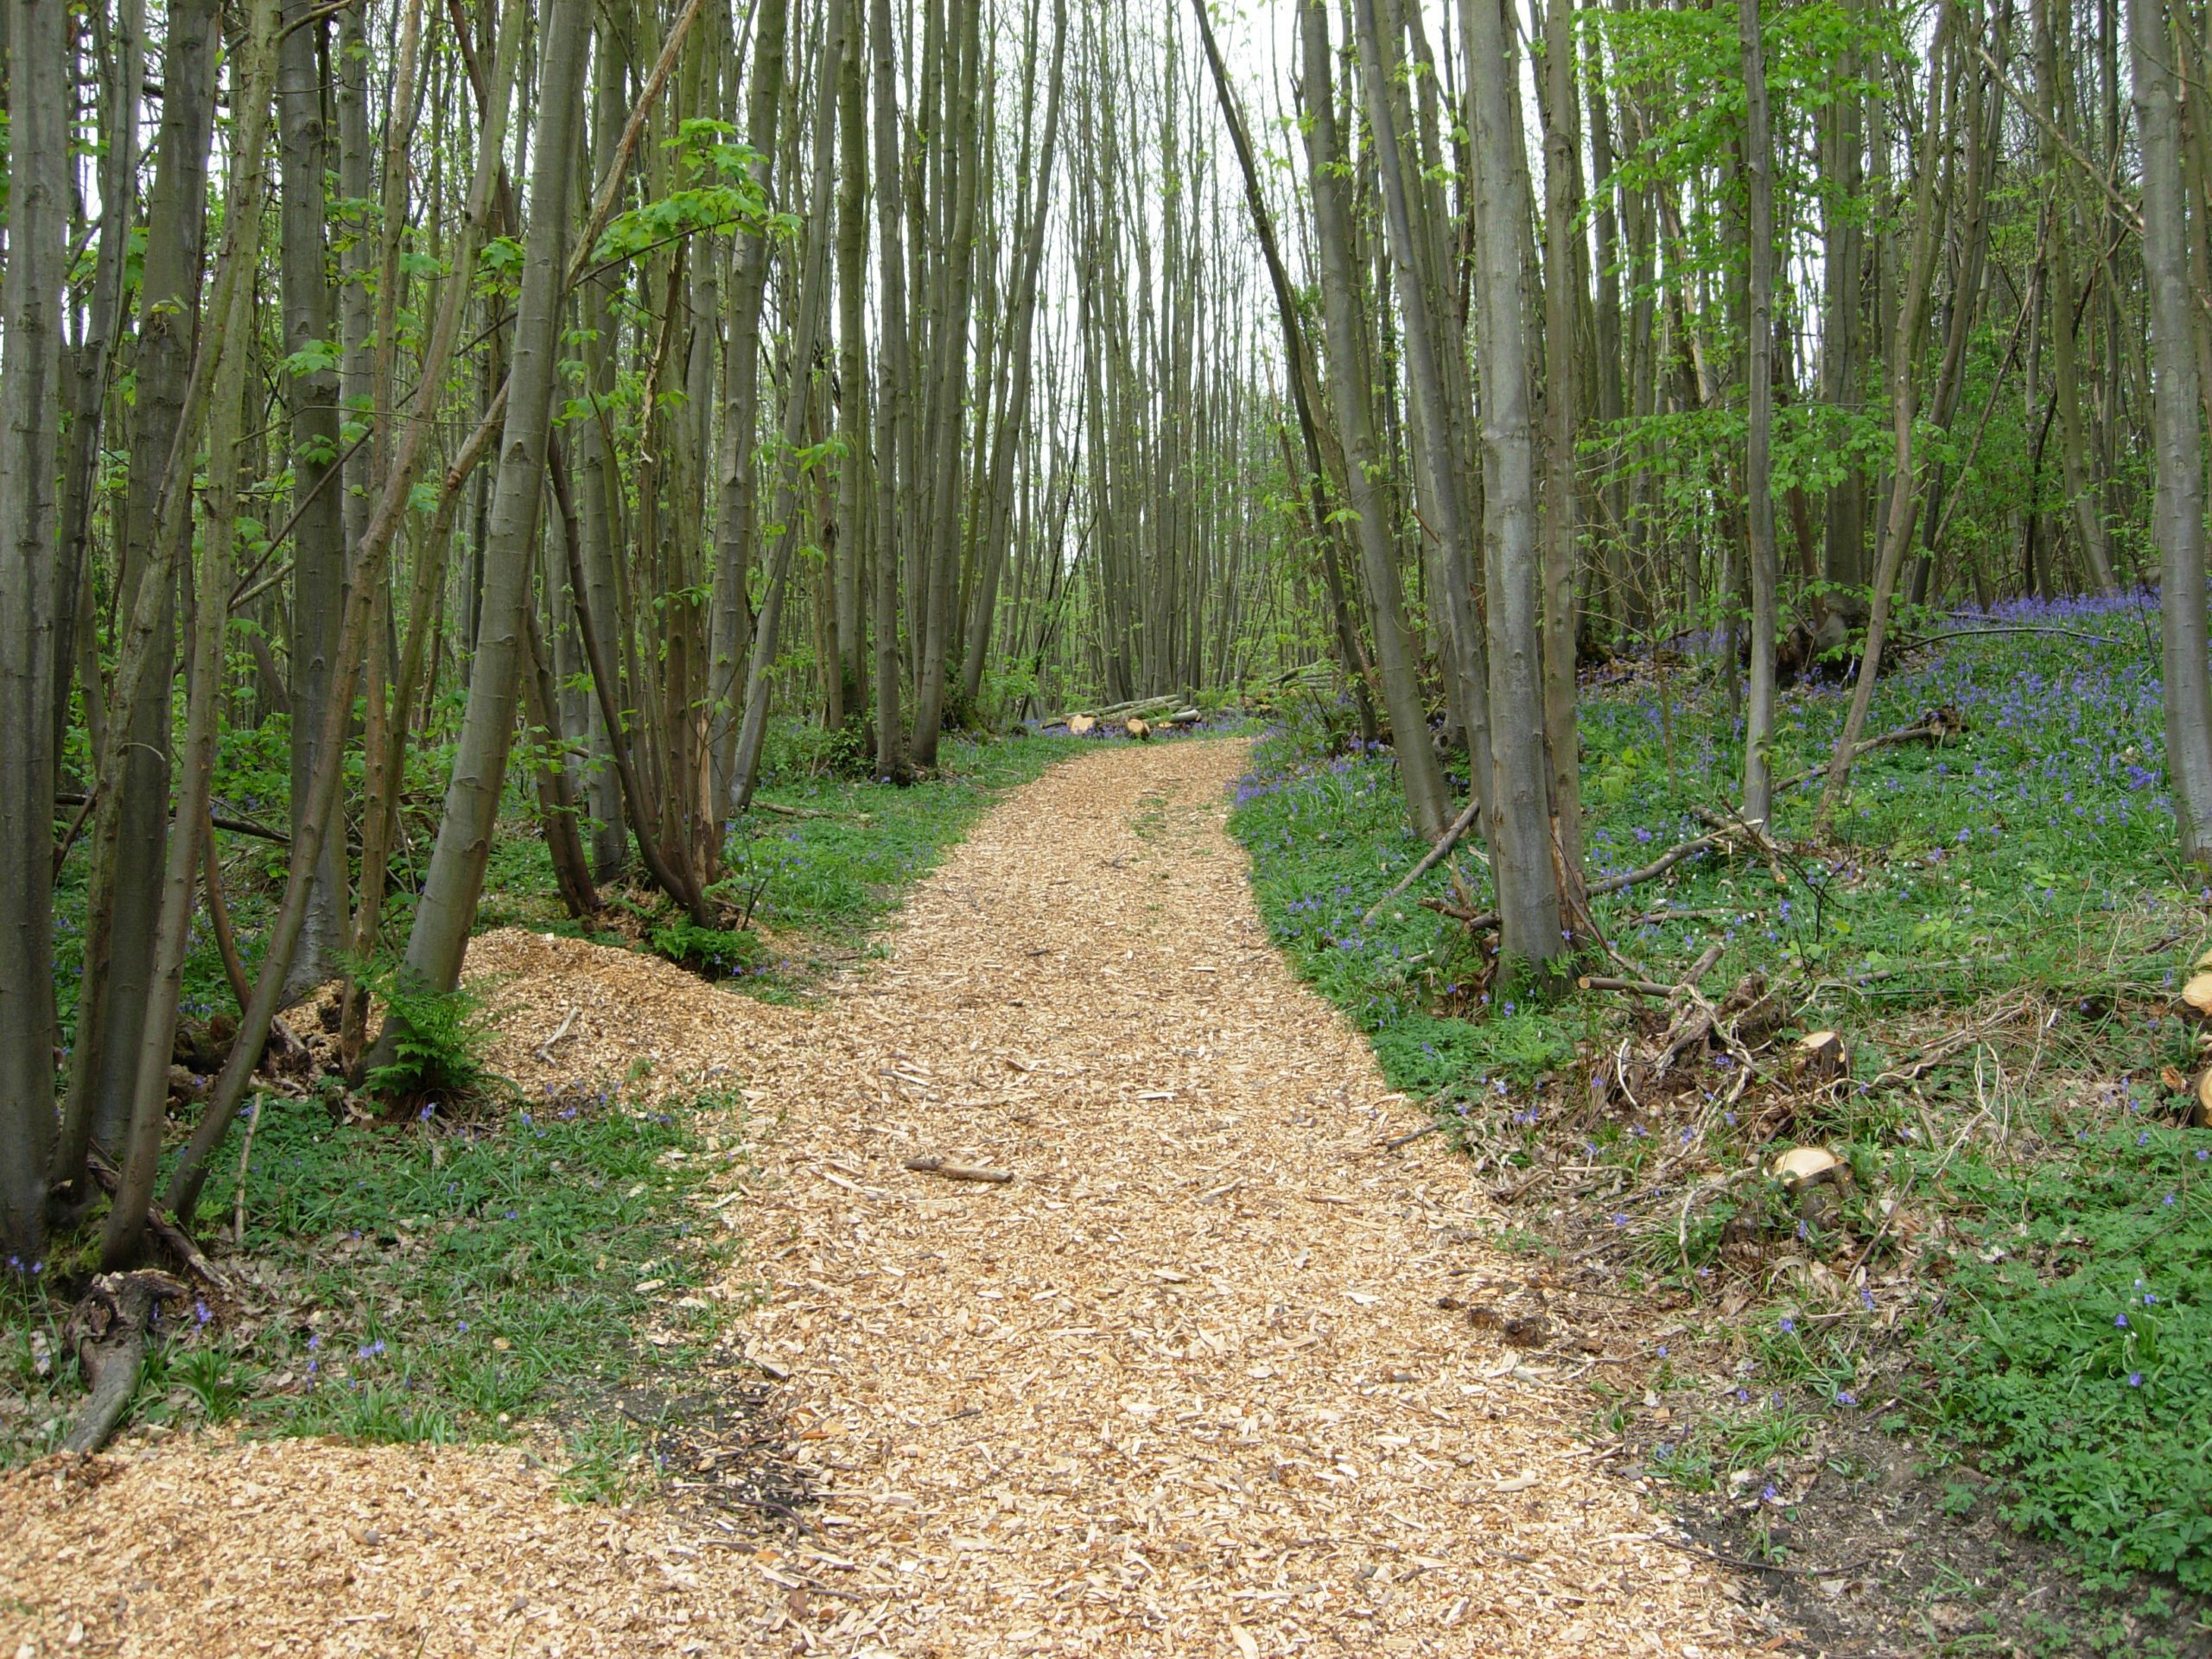 Wood chip path through woodlands. Tall trees and bluebells.